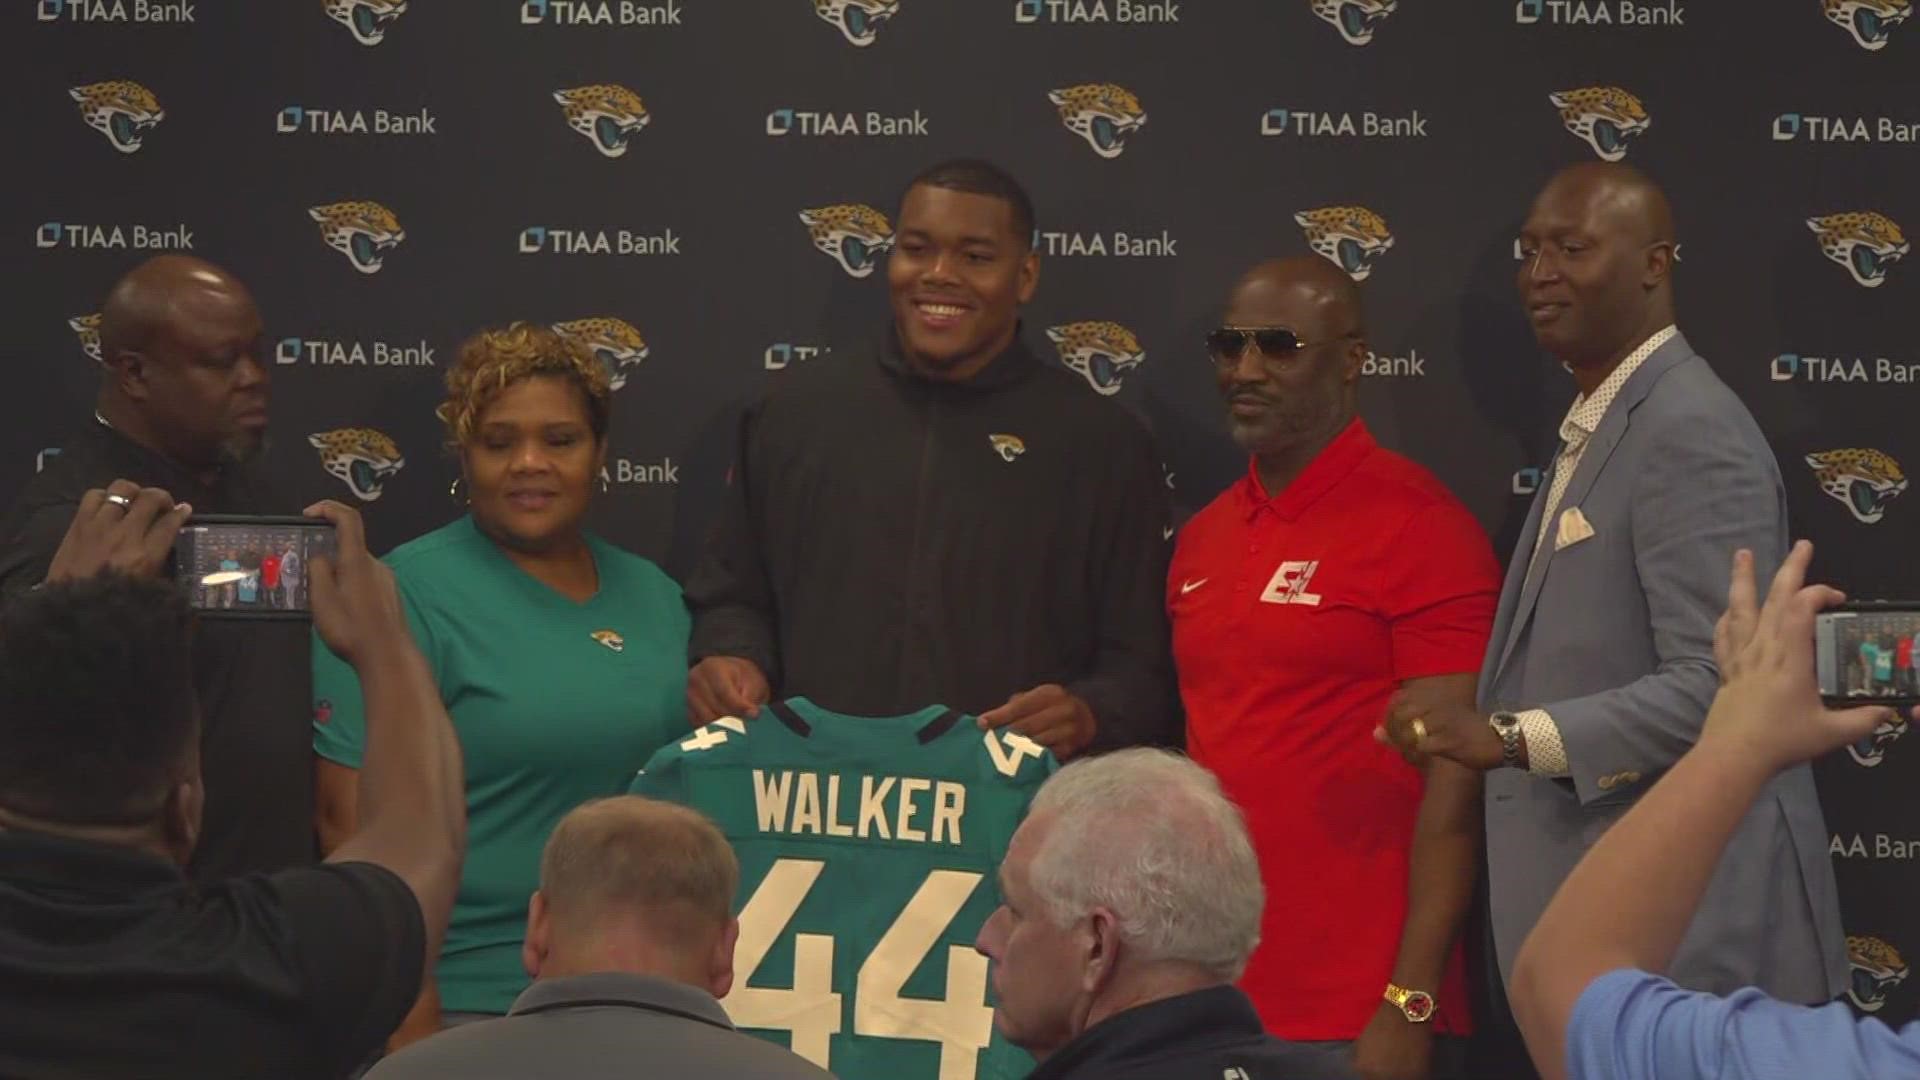 After addressing the media for the first time as a Jacksonville Jaguar, Travon Walker received his jersey and took some pics with his family.